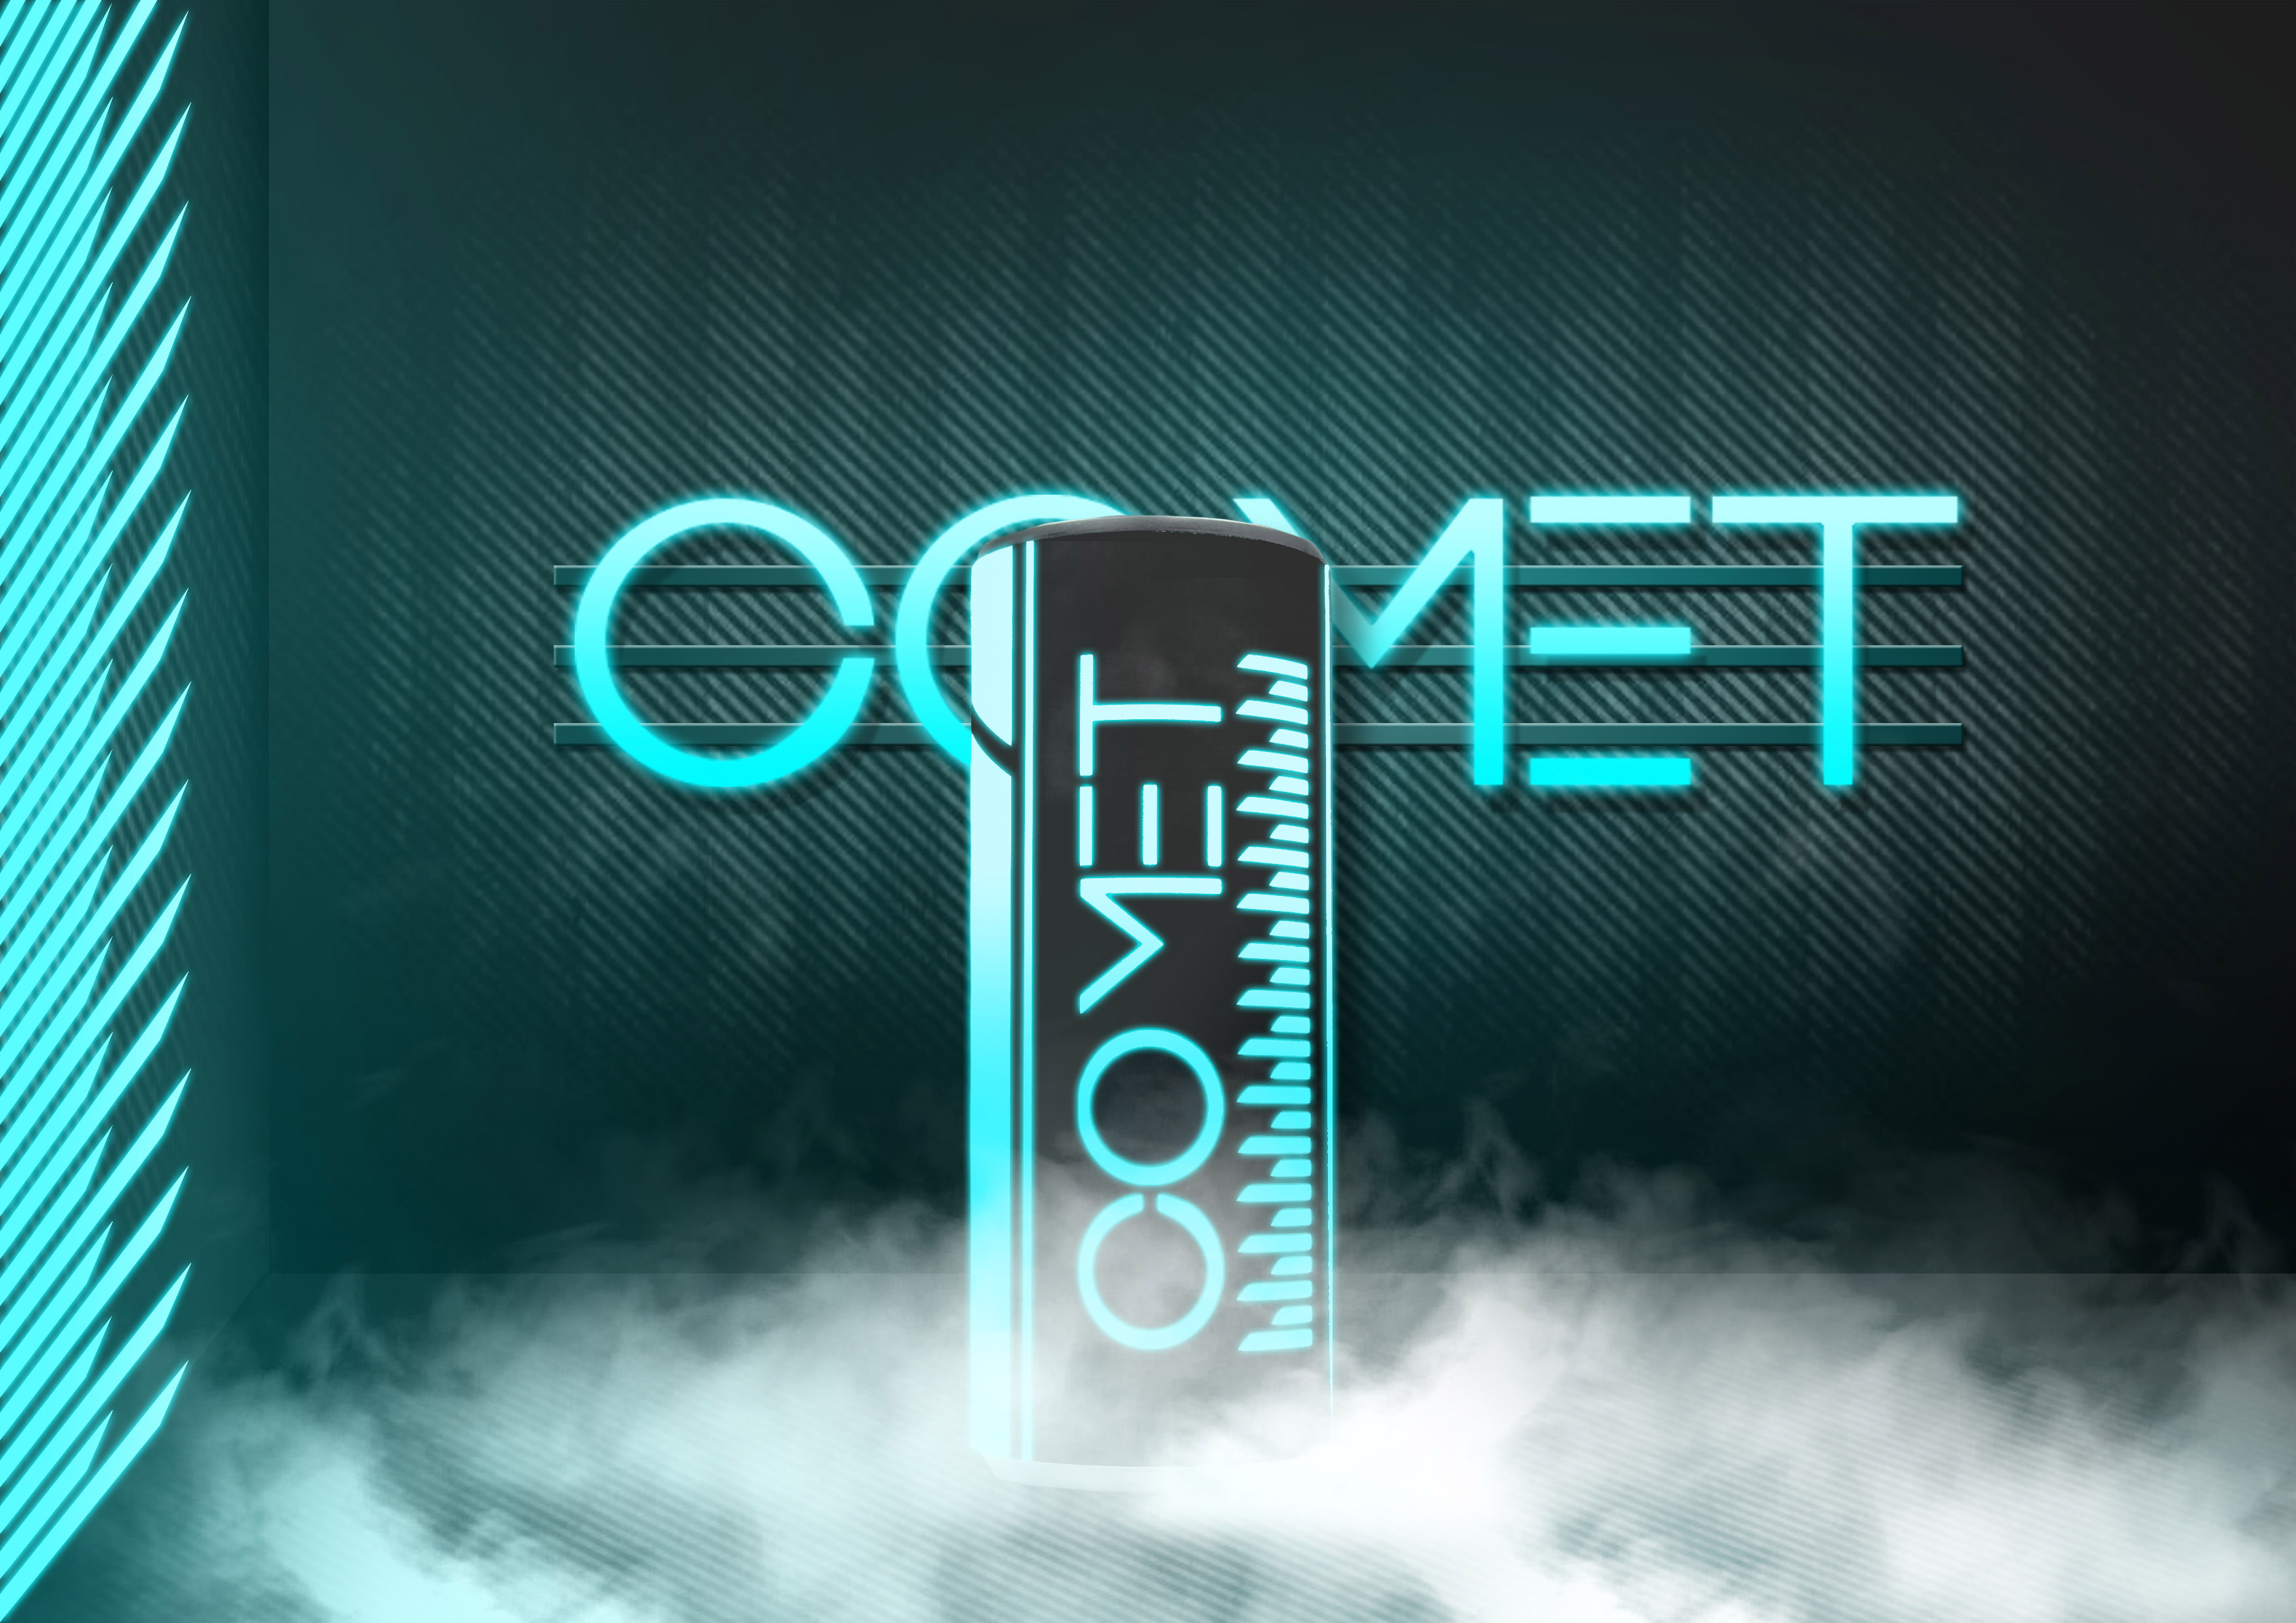 COMET energy drinks can placed in front of dark background with cyan lighting